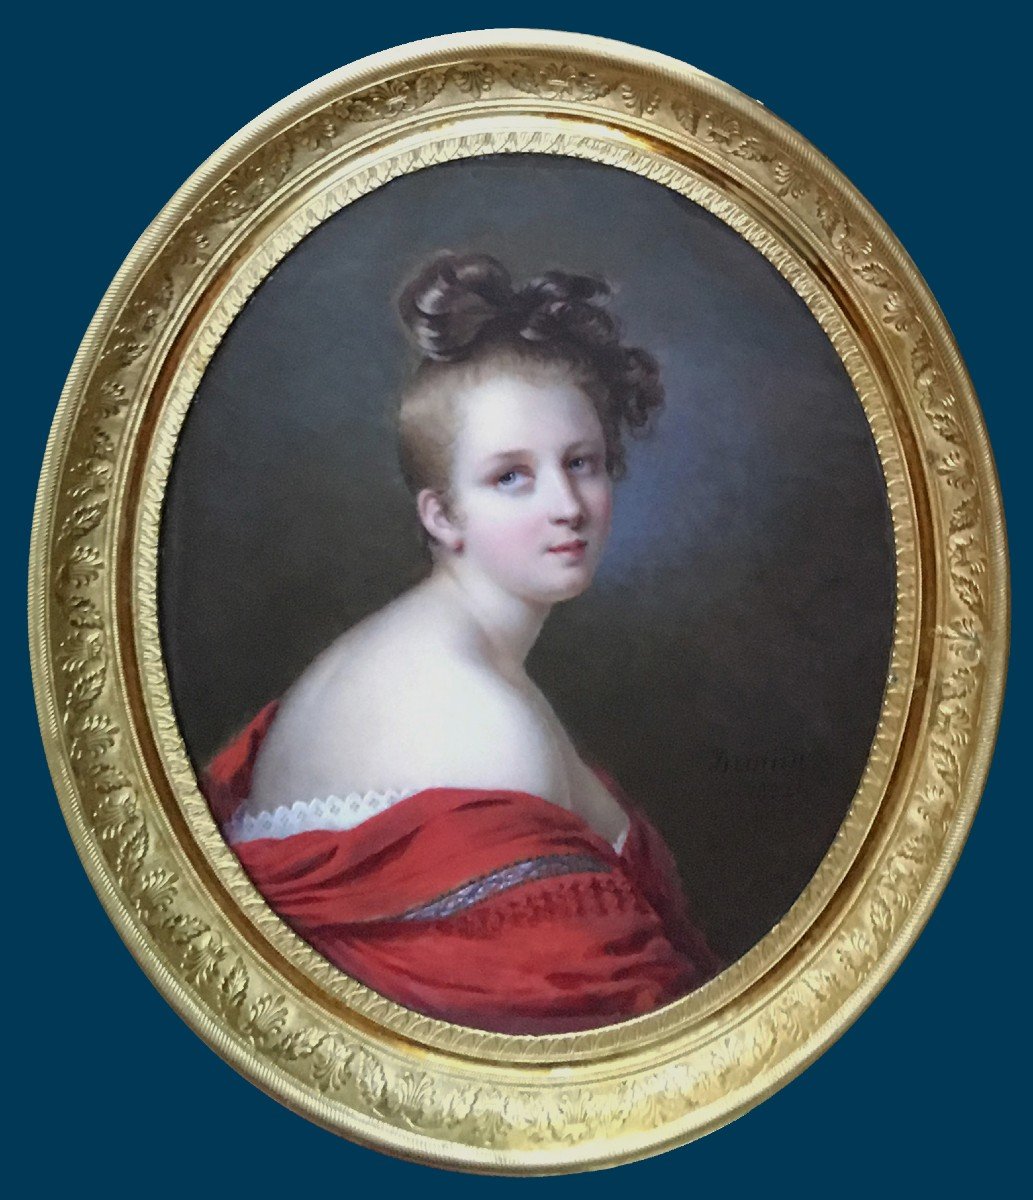 Drouin Jean-pierre (1782-1861) "portrait Of A Woman" Miniature, Oil/ivory, Signed And Dated, Frame